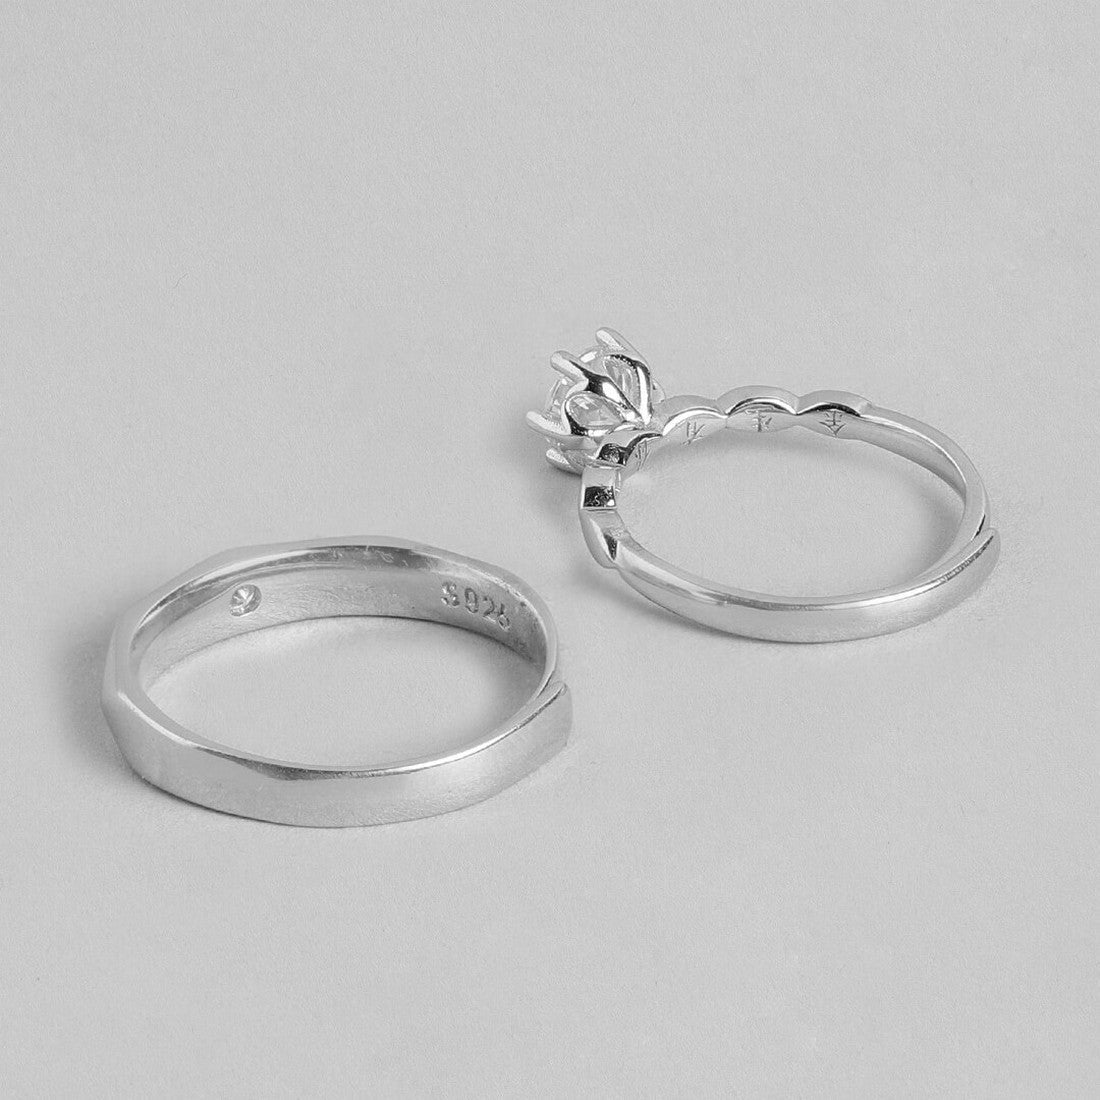 Eternally Bound Couple Rings 925 Silver Rings - Valentines Edition With Gift Box (Adjustable)